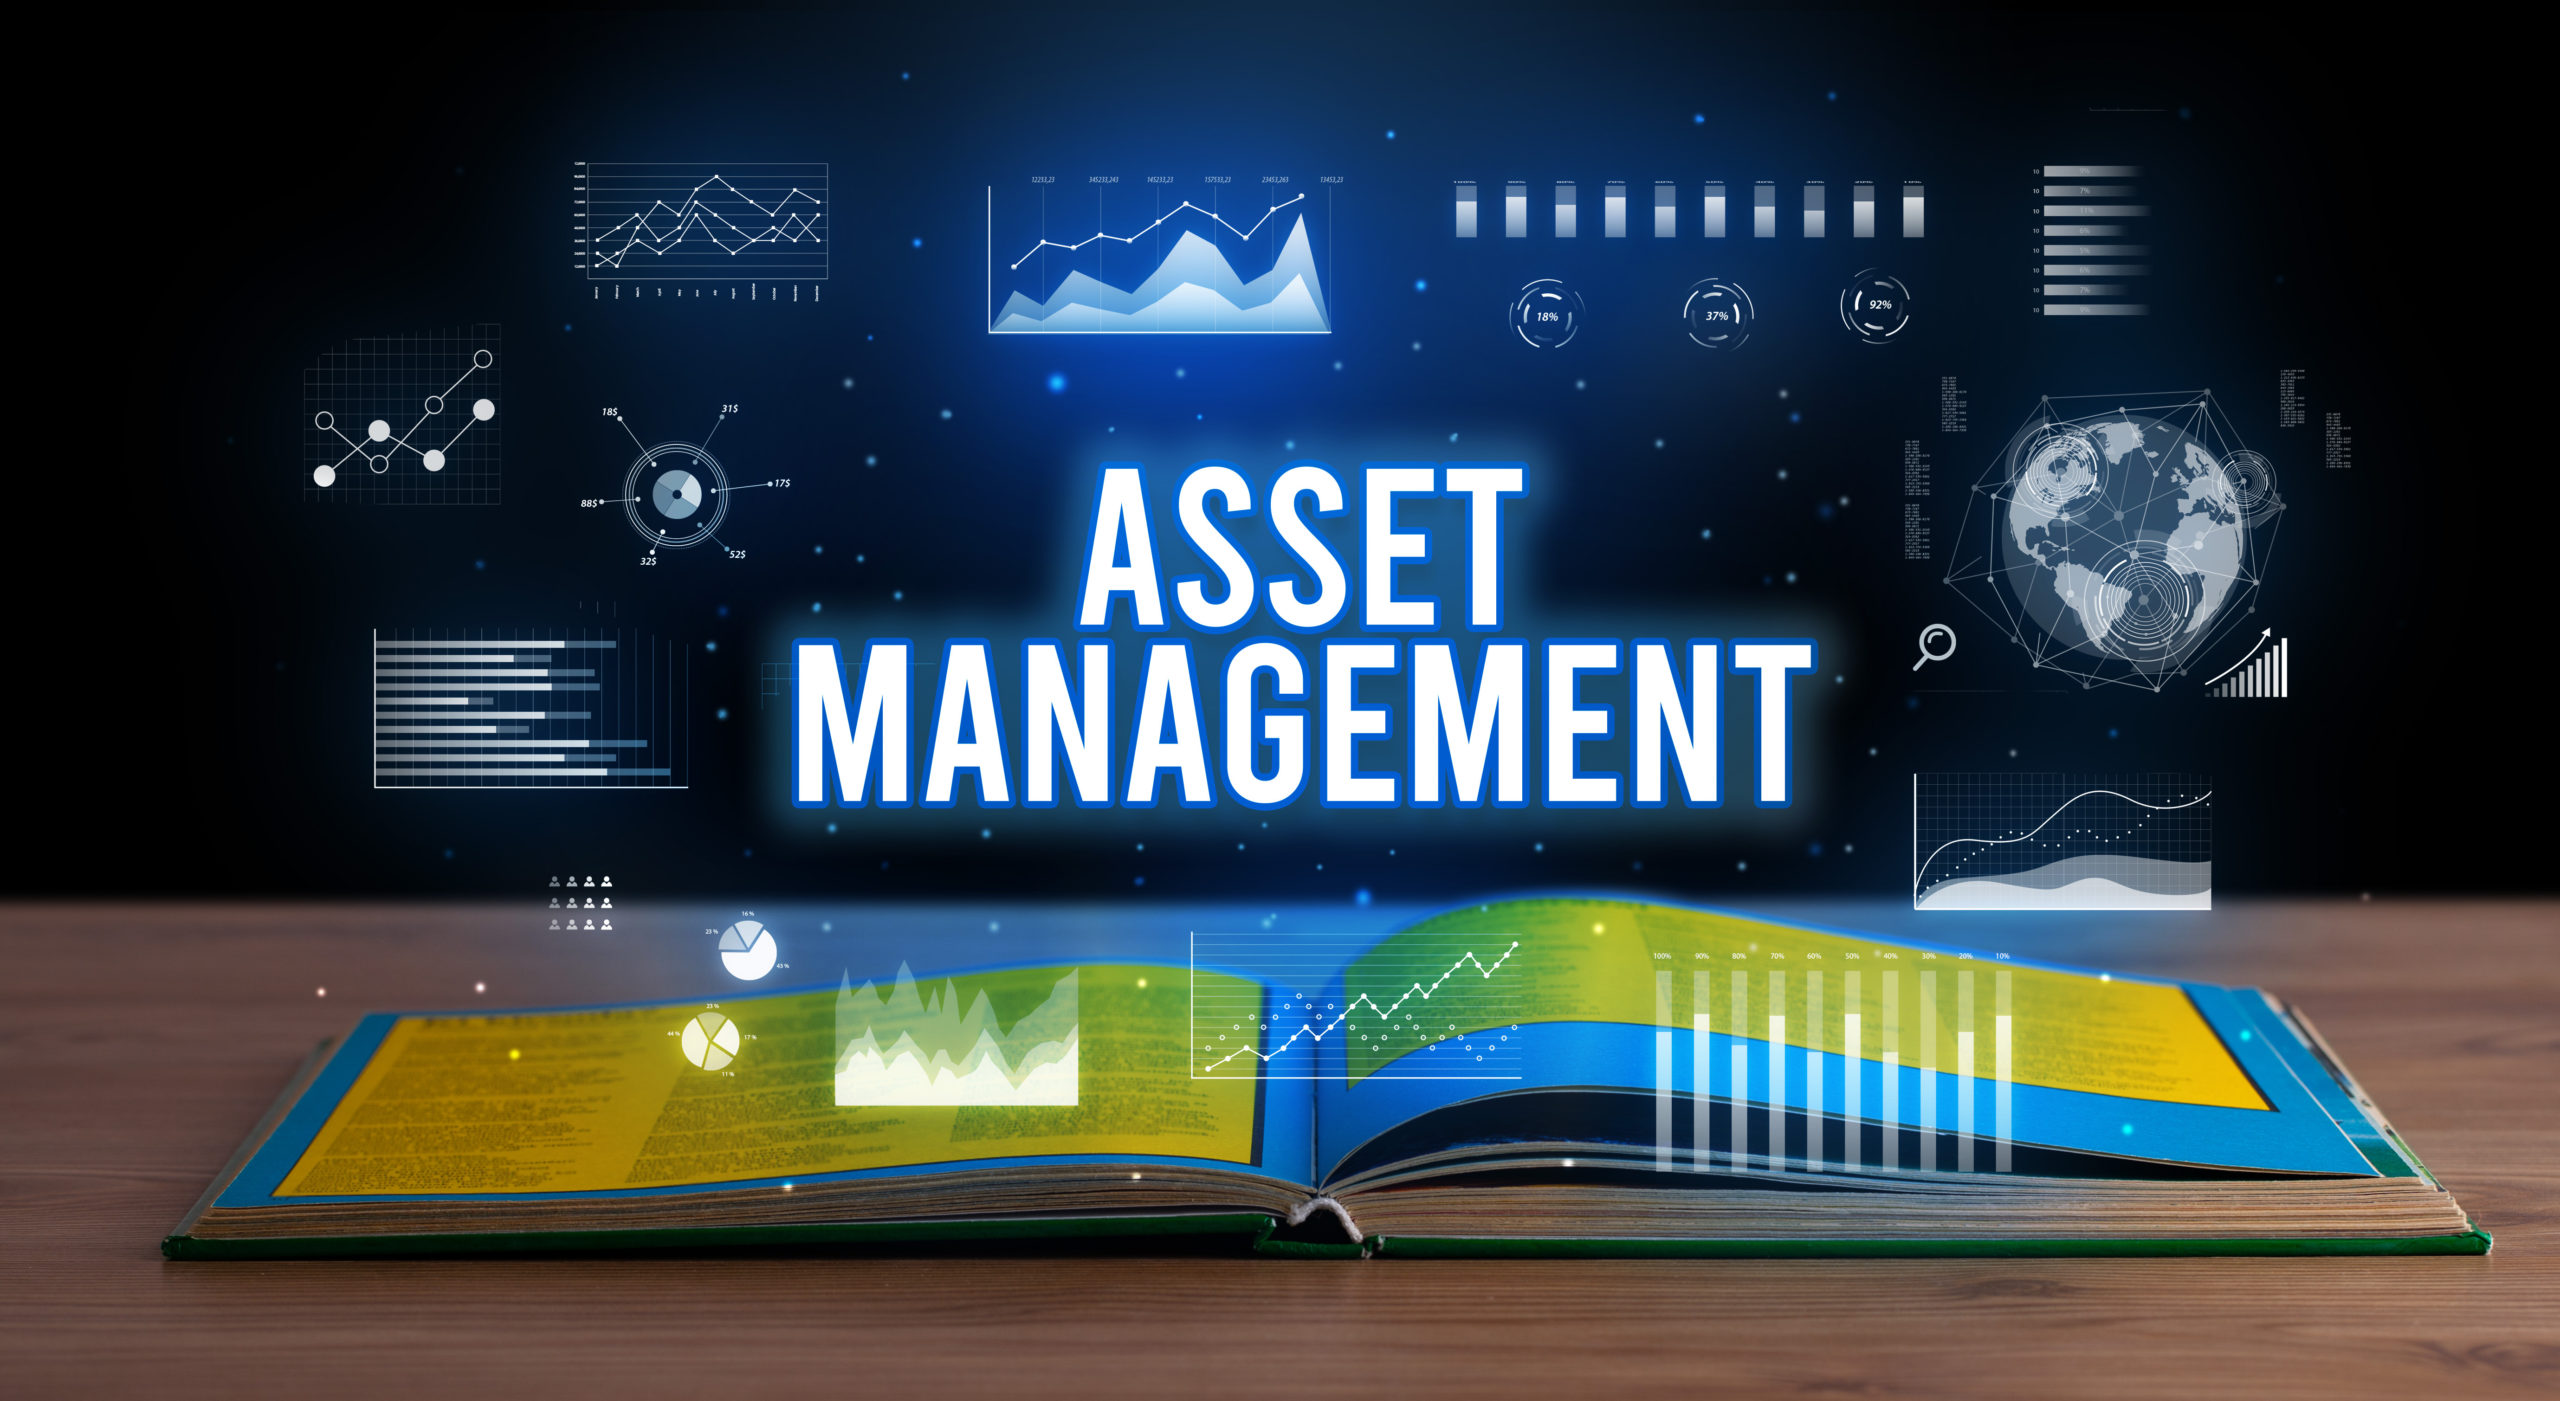 The New Year starts with digital road asset management